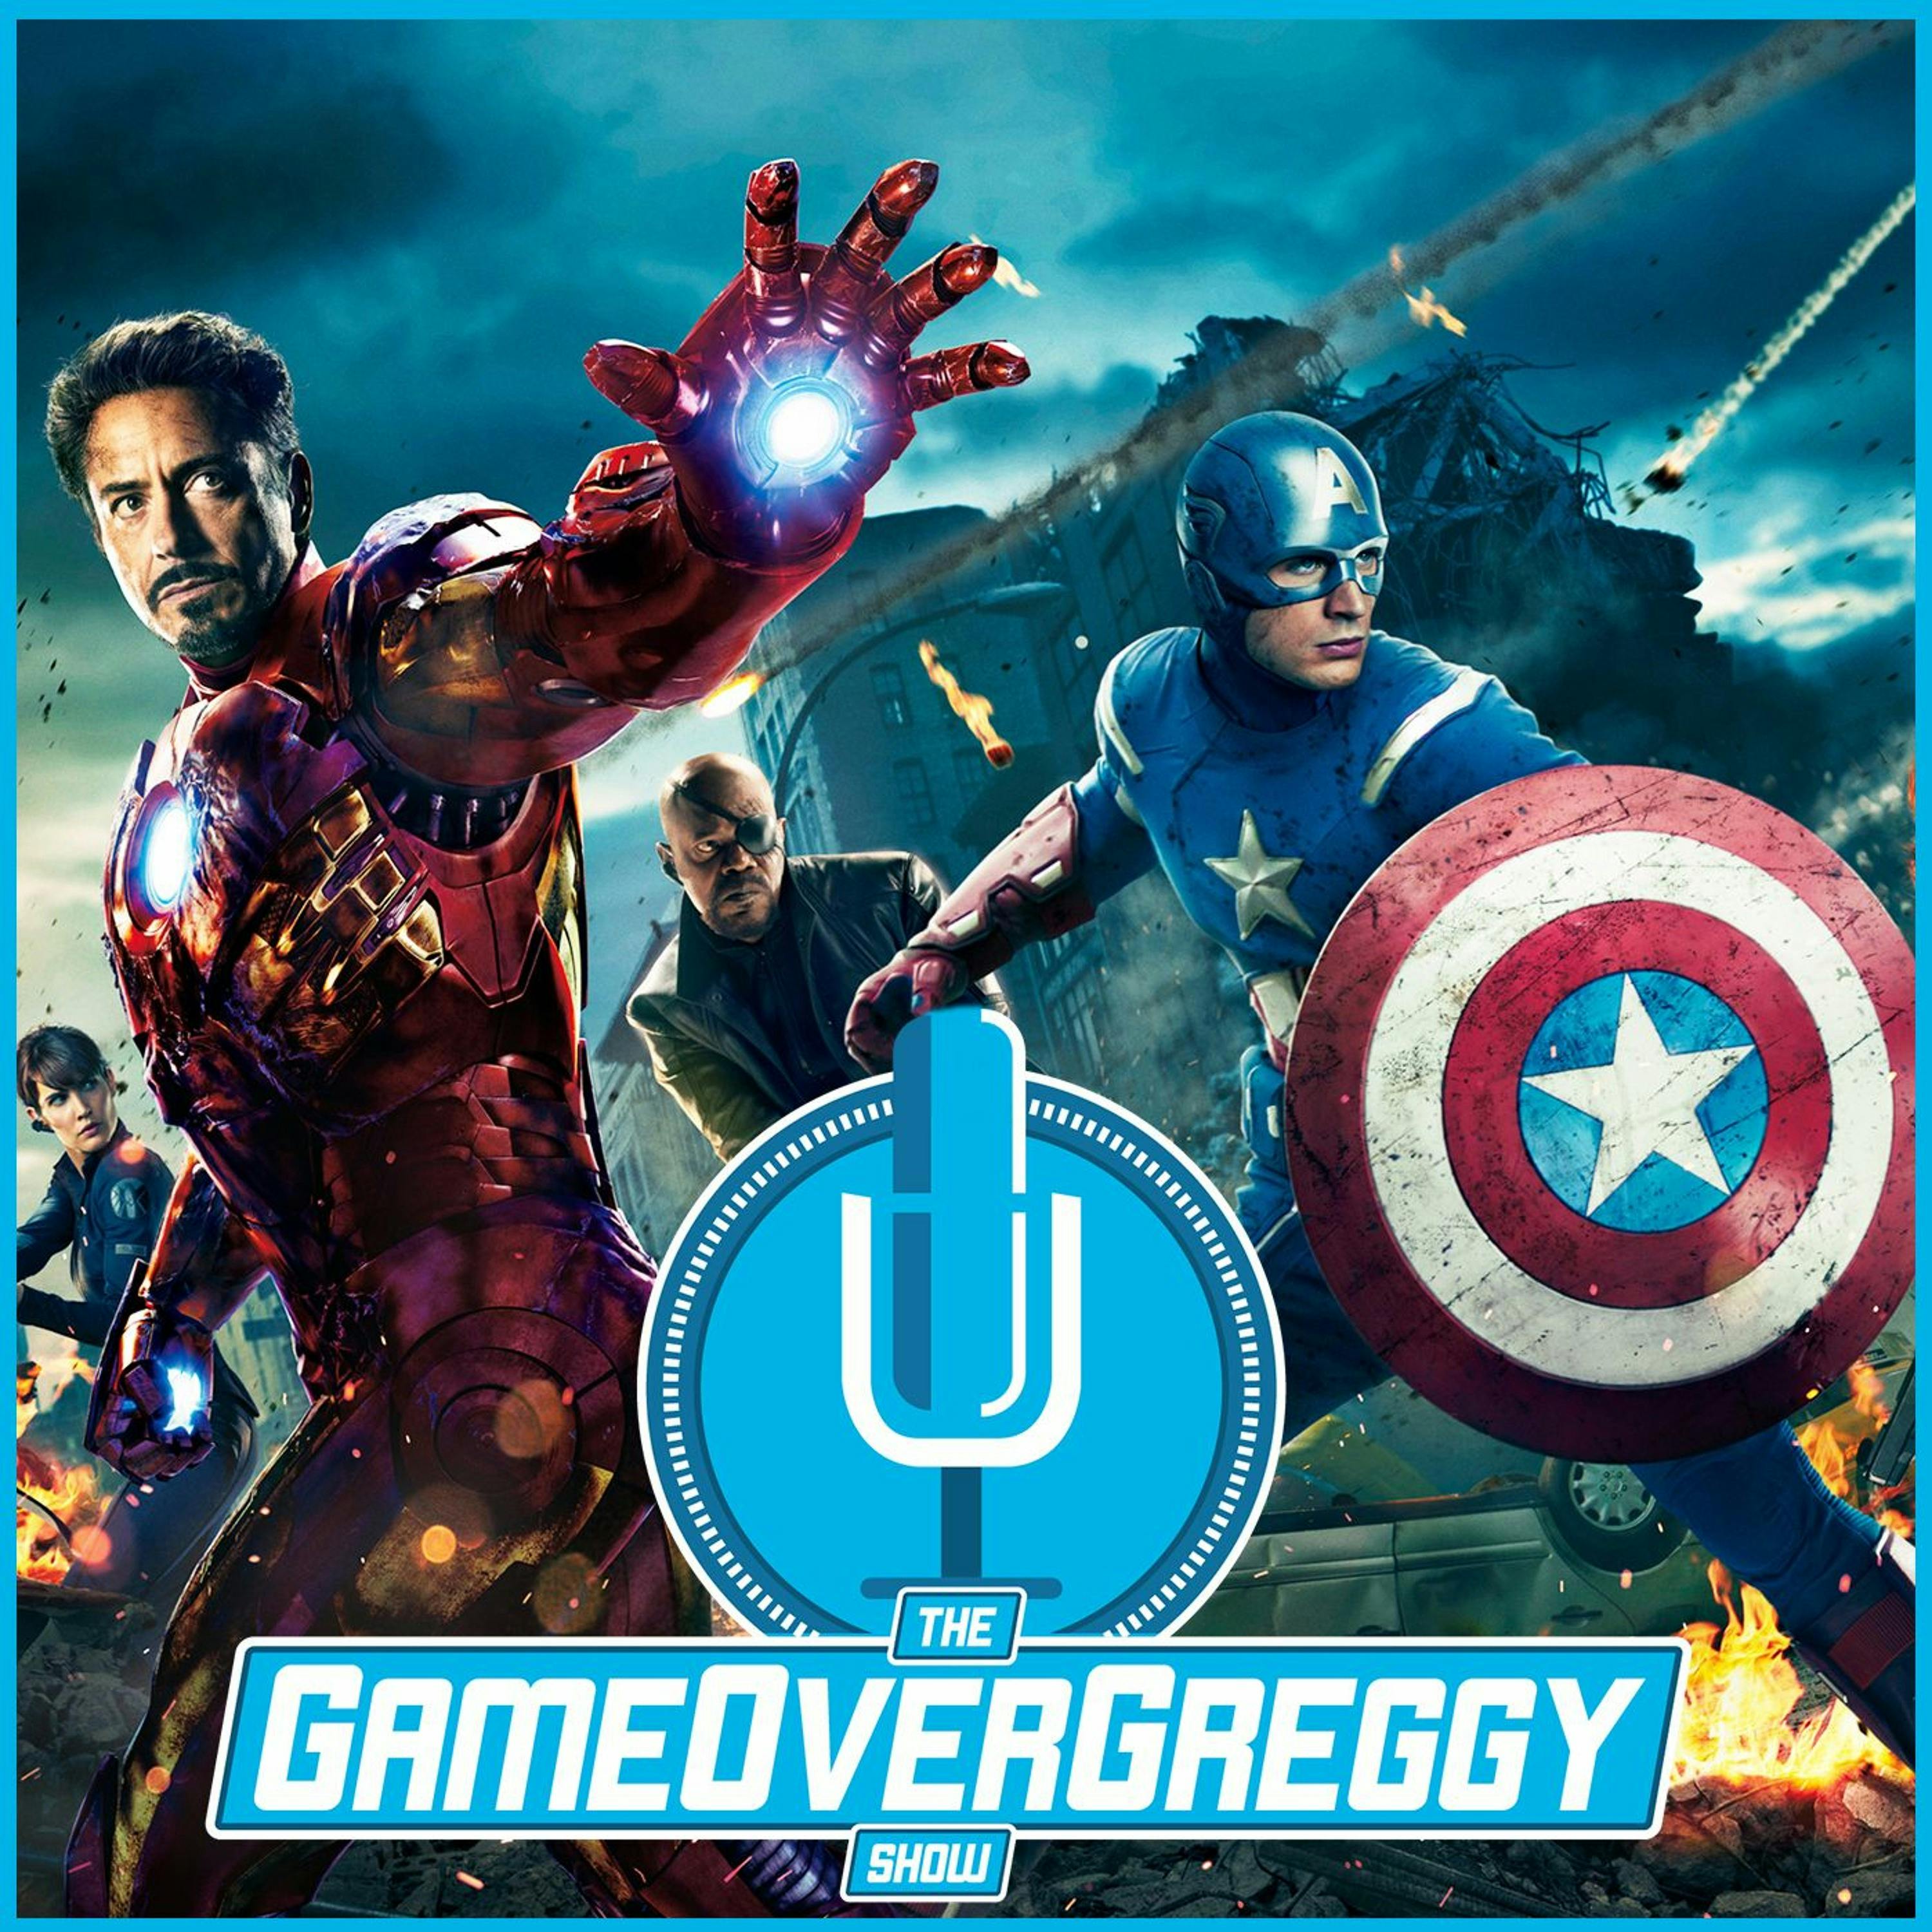 Ranking The Marvel Movies and Netflix Reviews - The GameOverGreggy Show Ep. 190